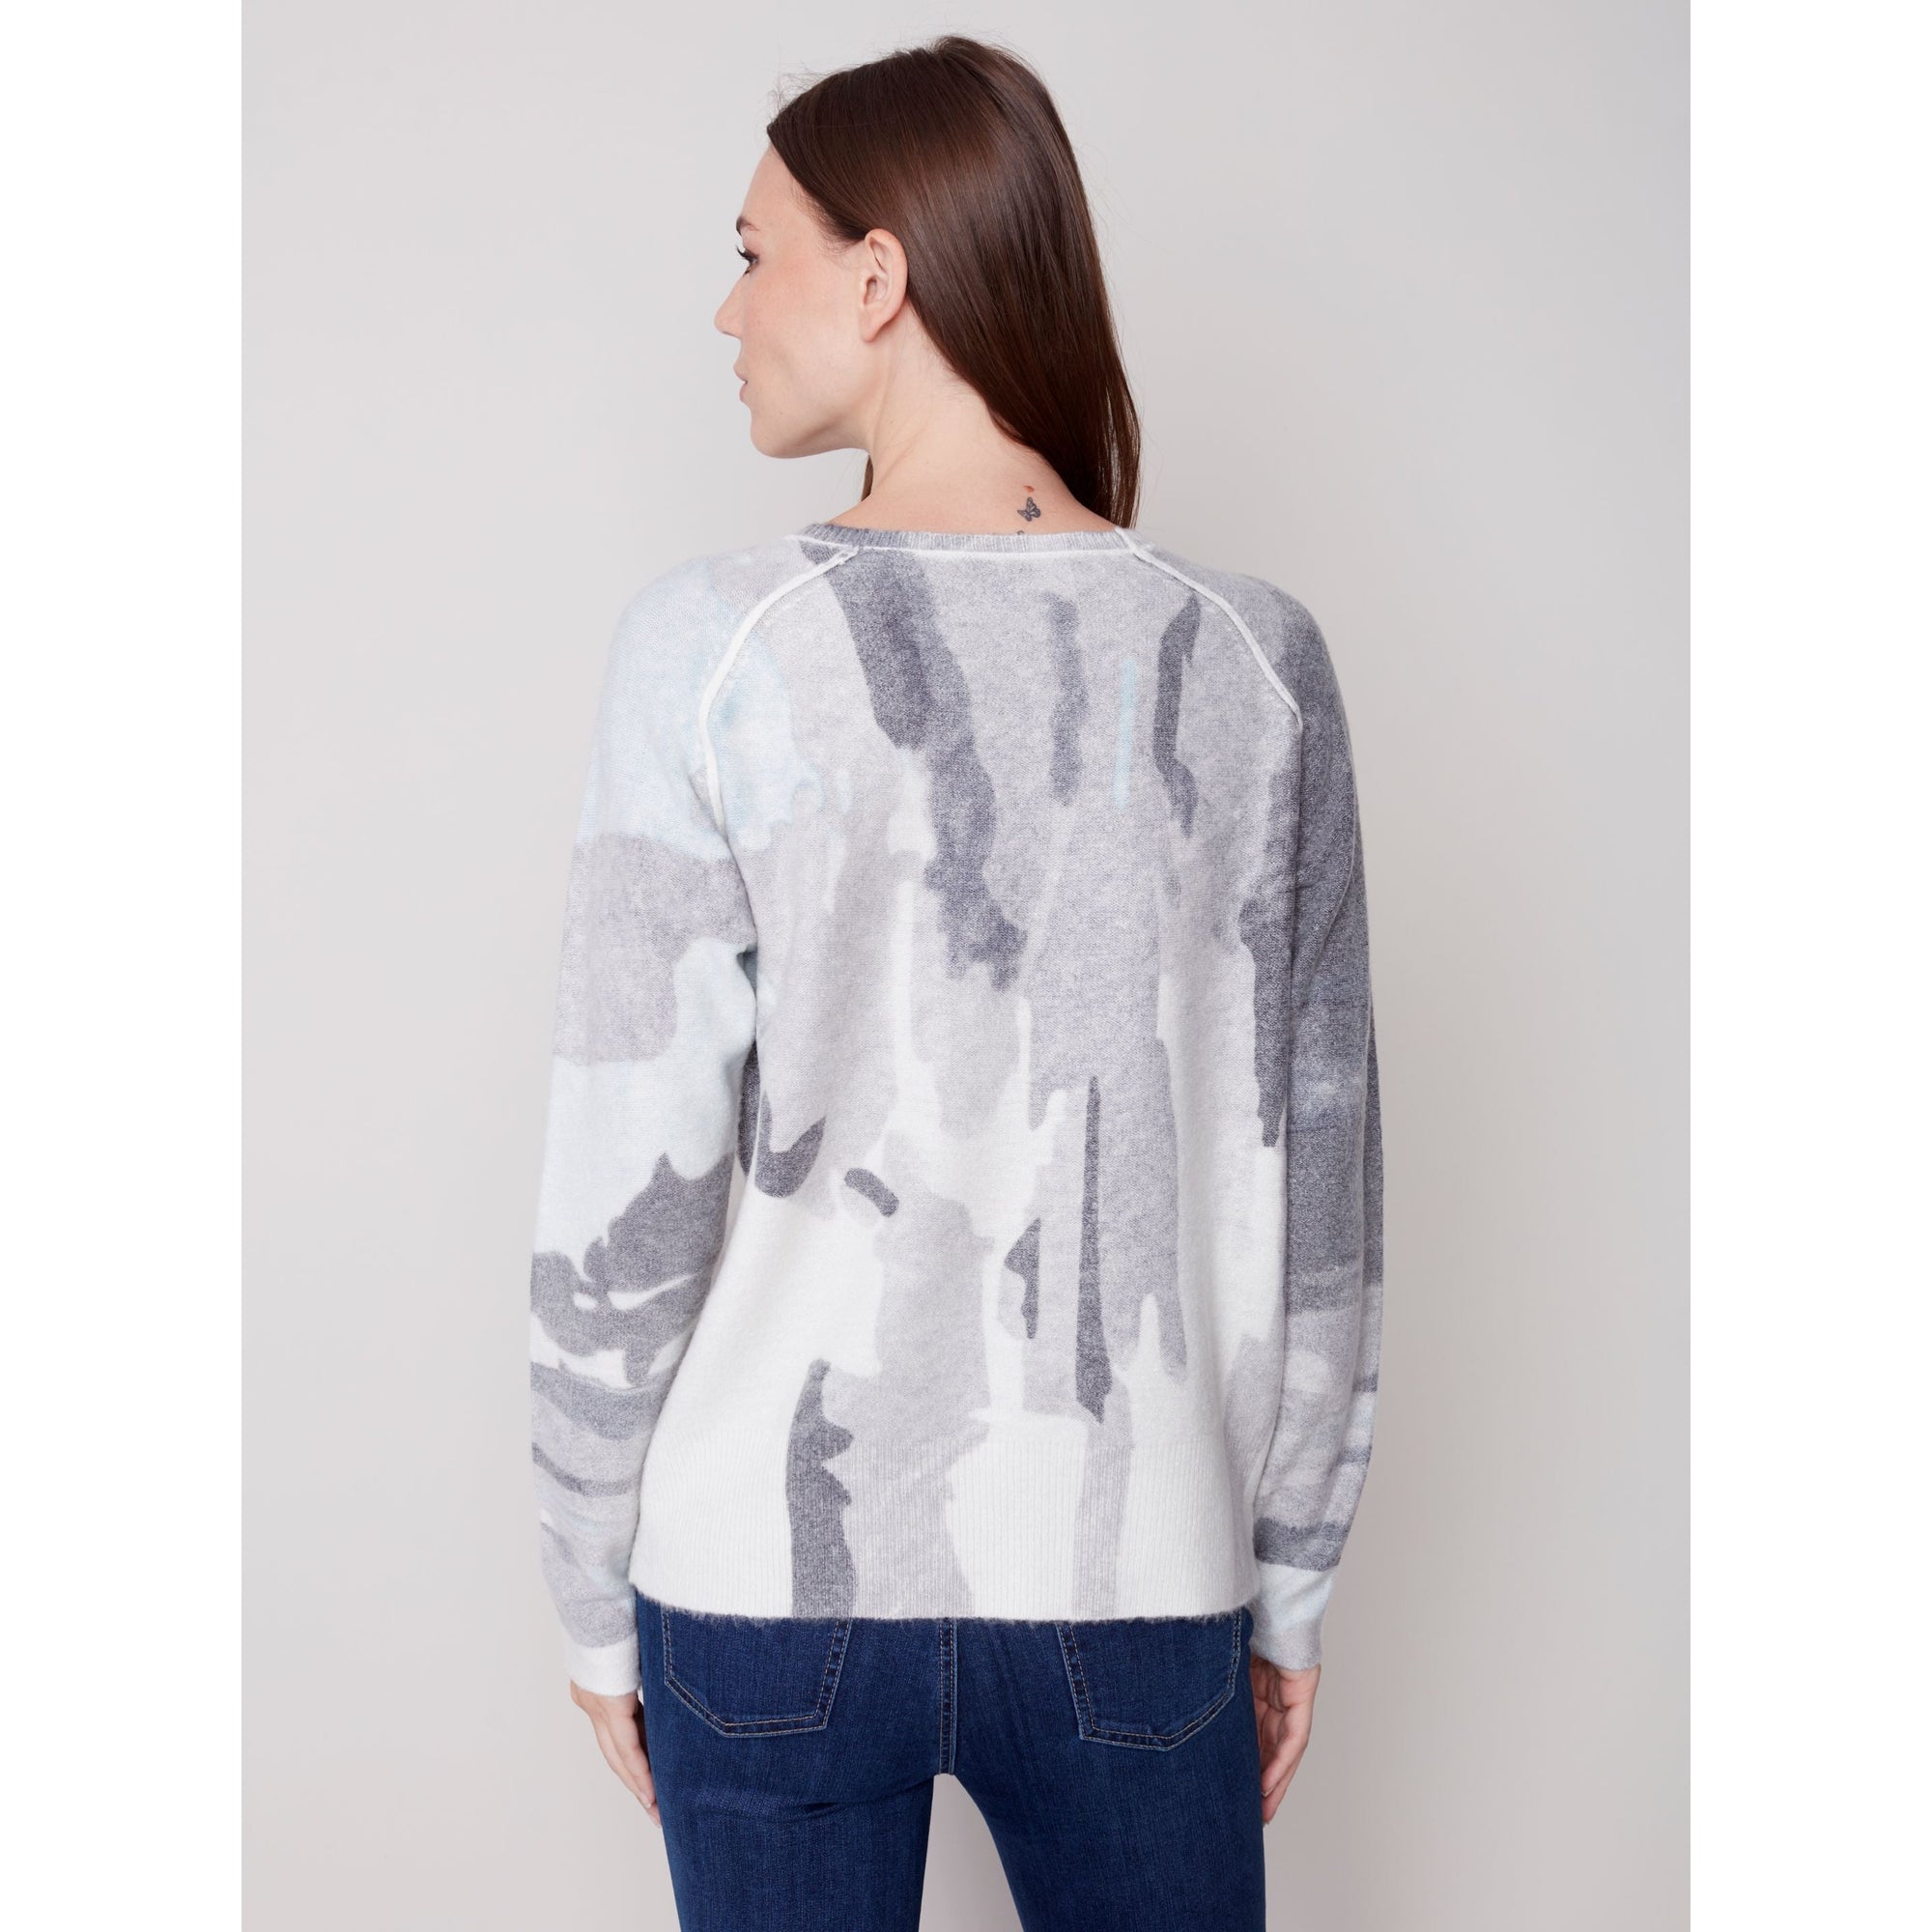 REVERSIBLE PRINTED SWEATER - CHARCOAL-Sweaters & Jackets-CHARLIE B-XSMALL-CHARCOAL-Coriander